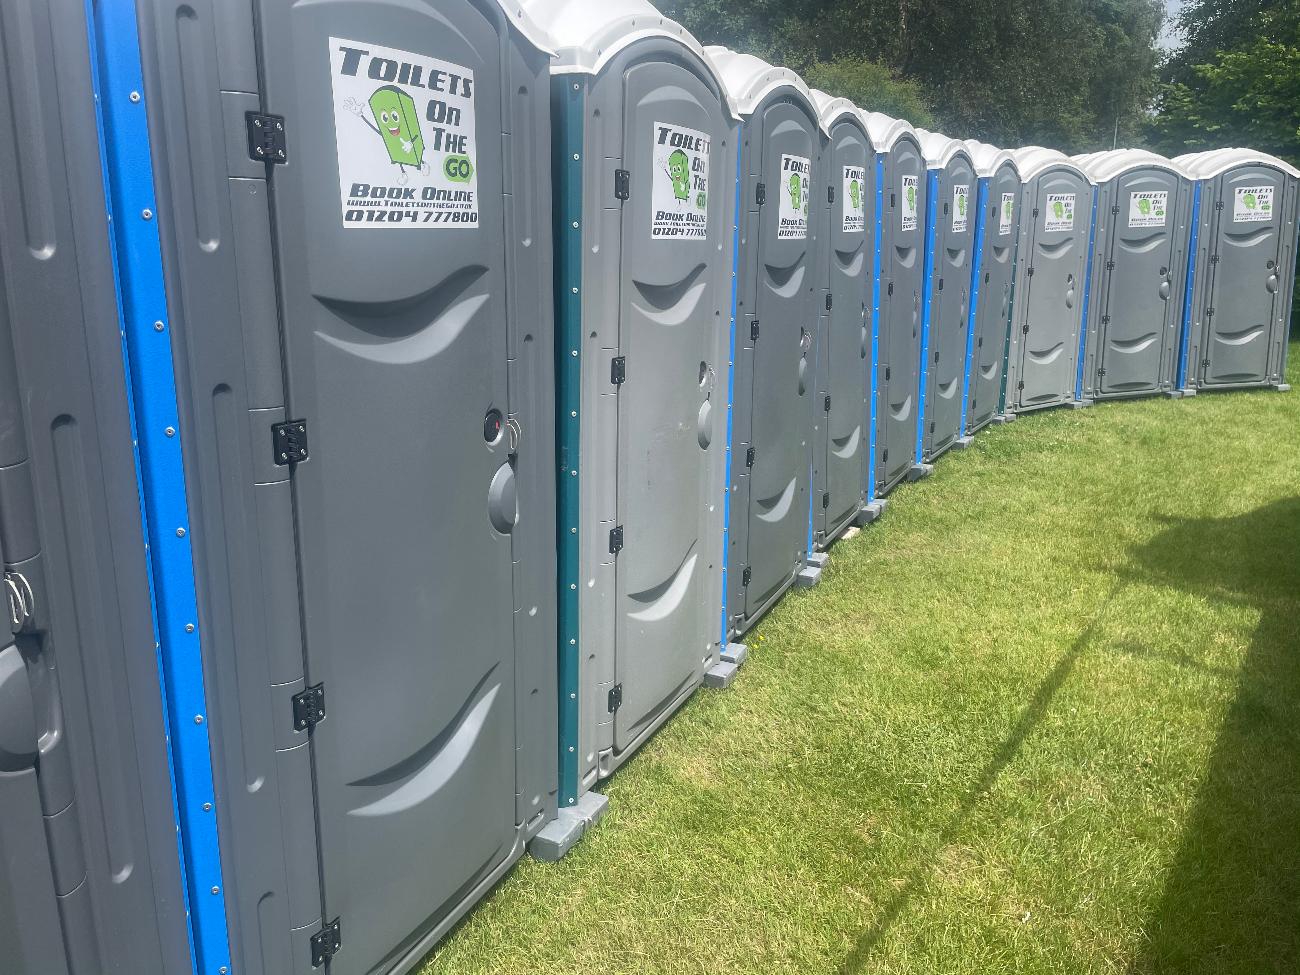 Gallery | Portable Toilet Loo Hire Rental Company in North West uk and Manchester gallery image 17